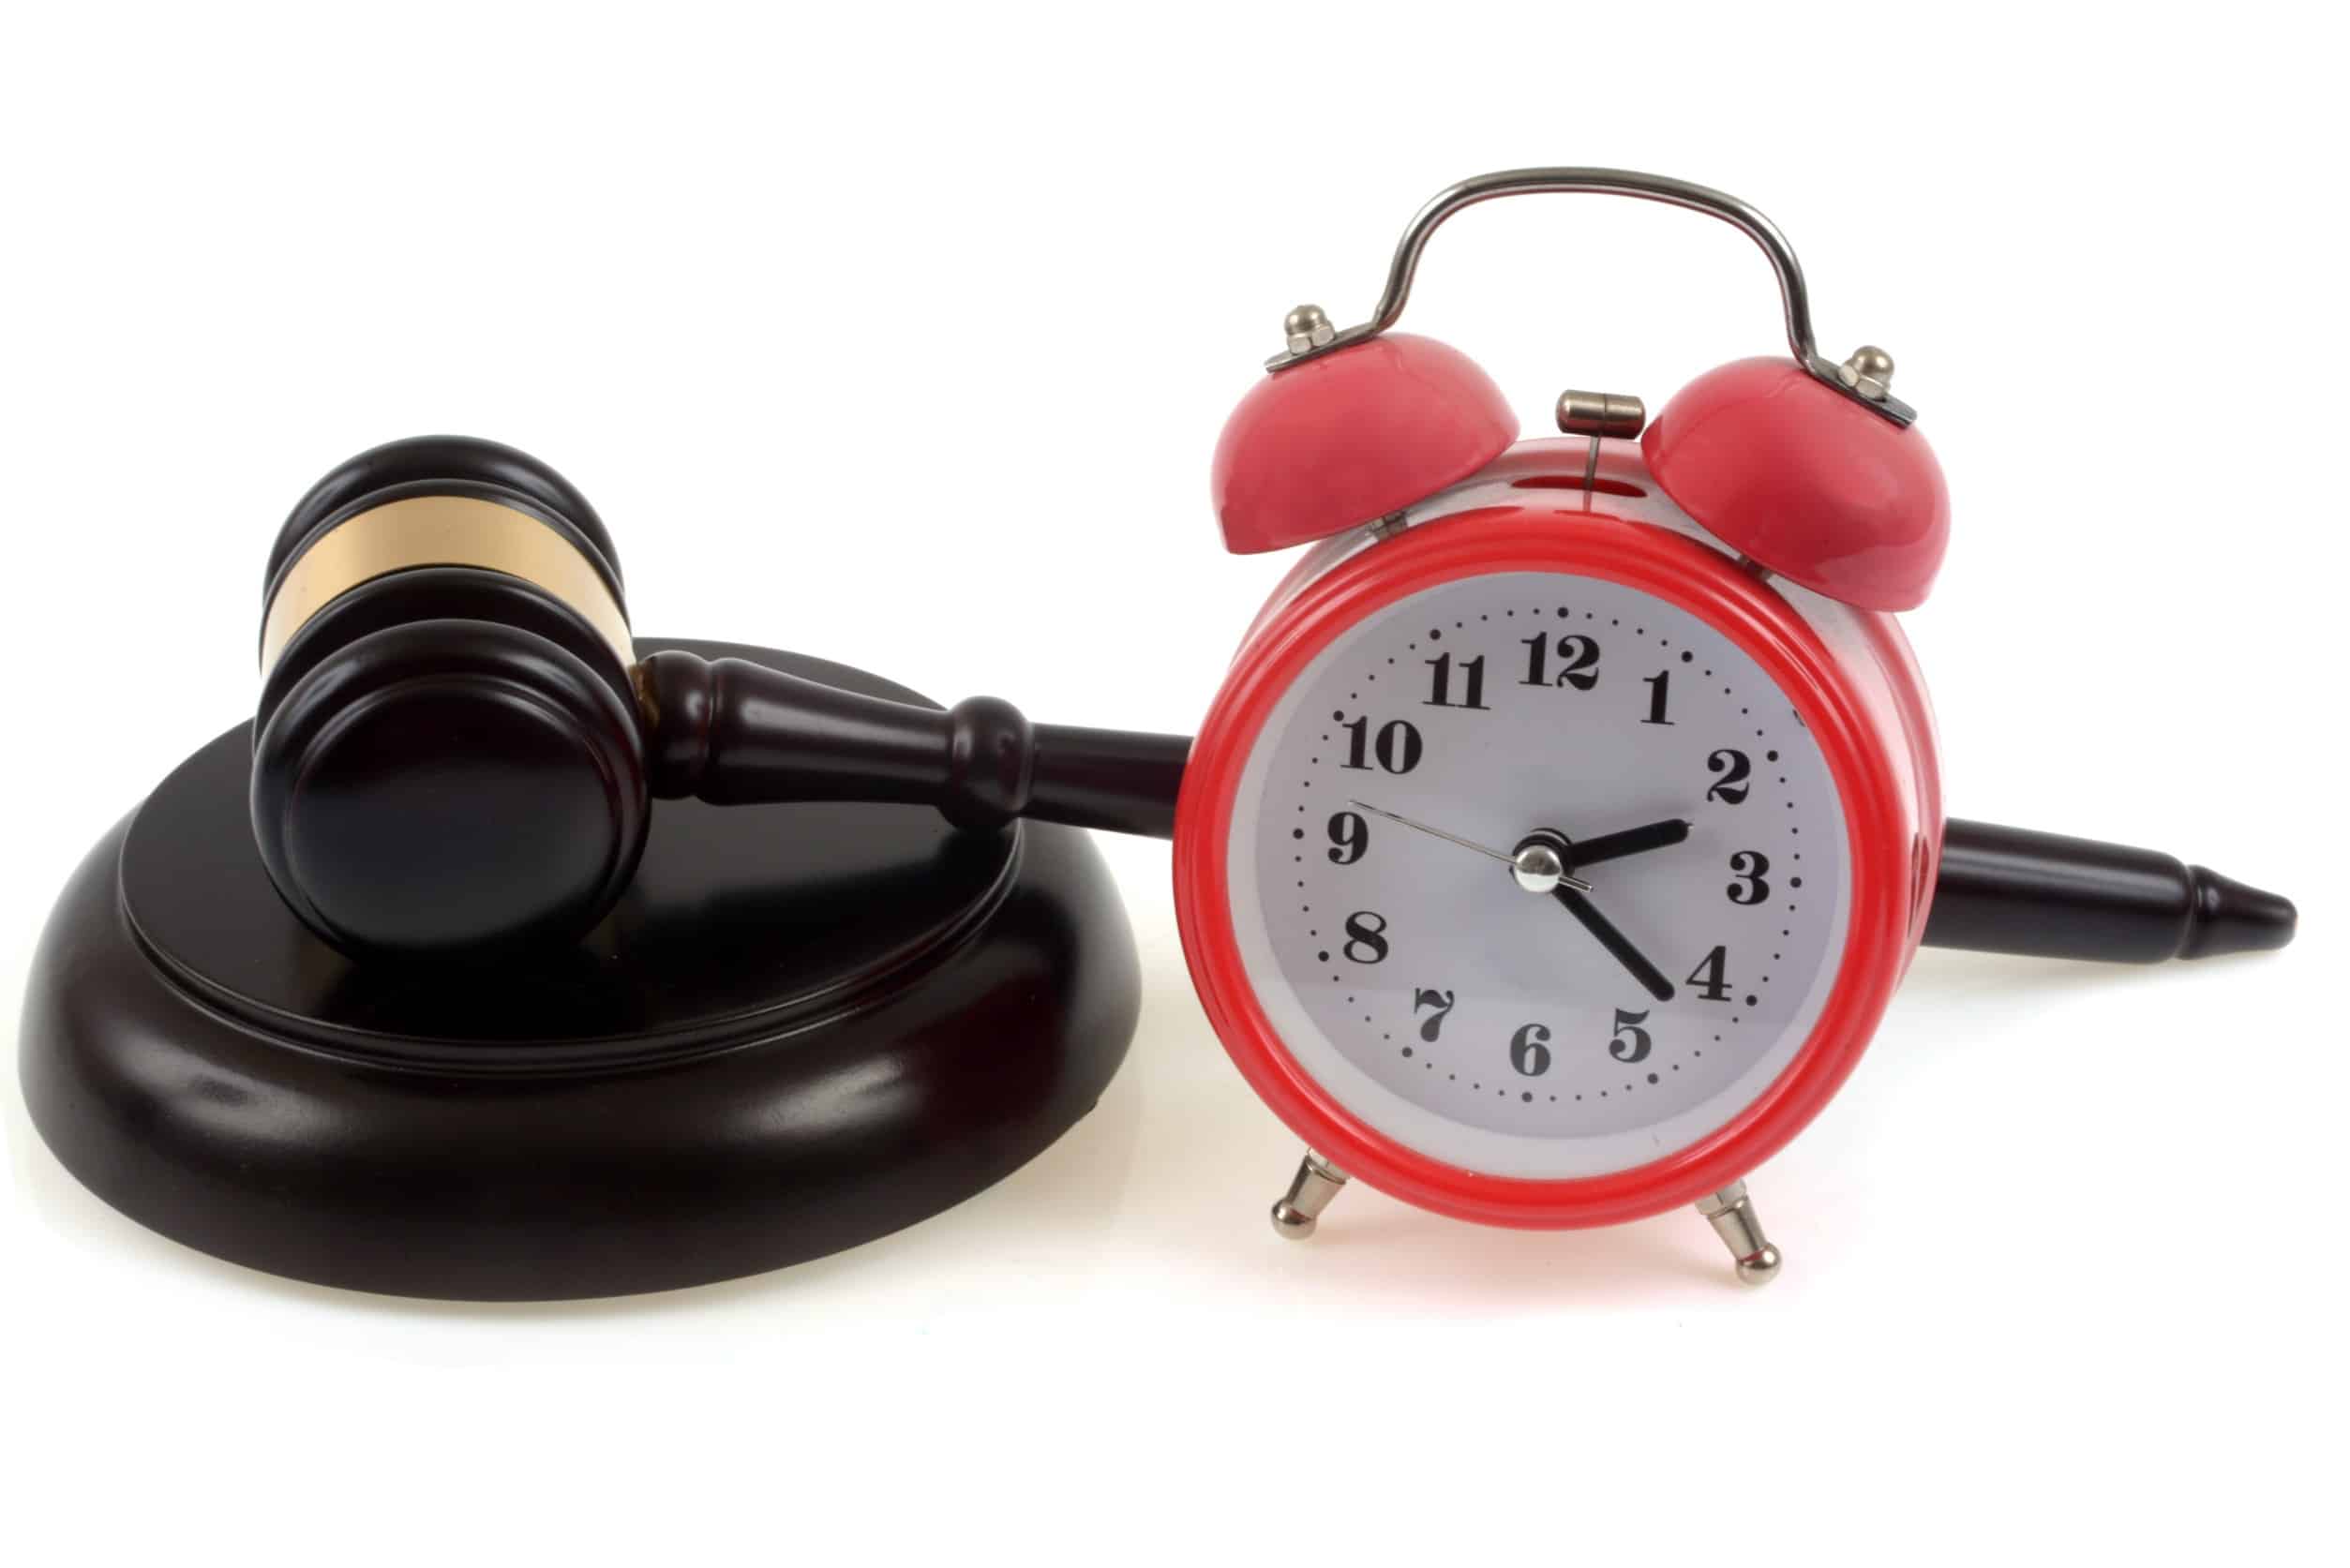 What Happens If The Statute Of Limitations Has Passed?